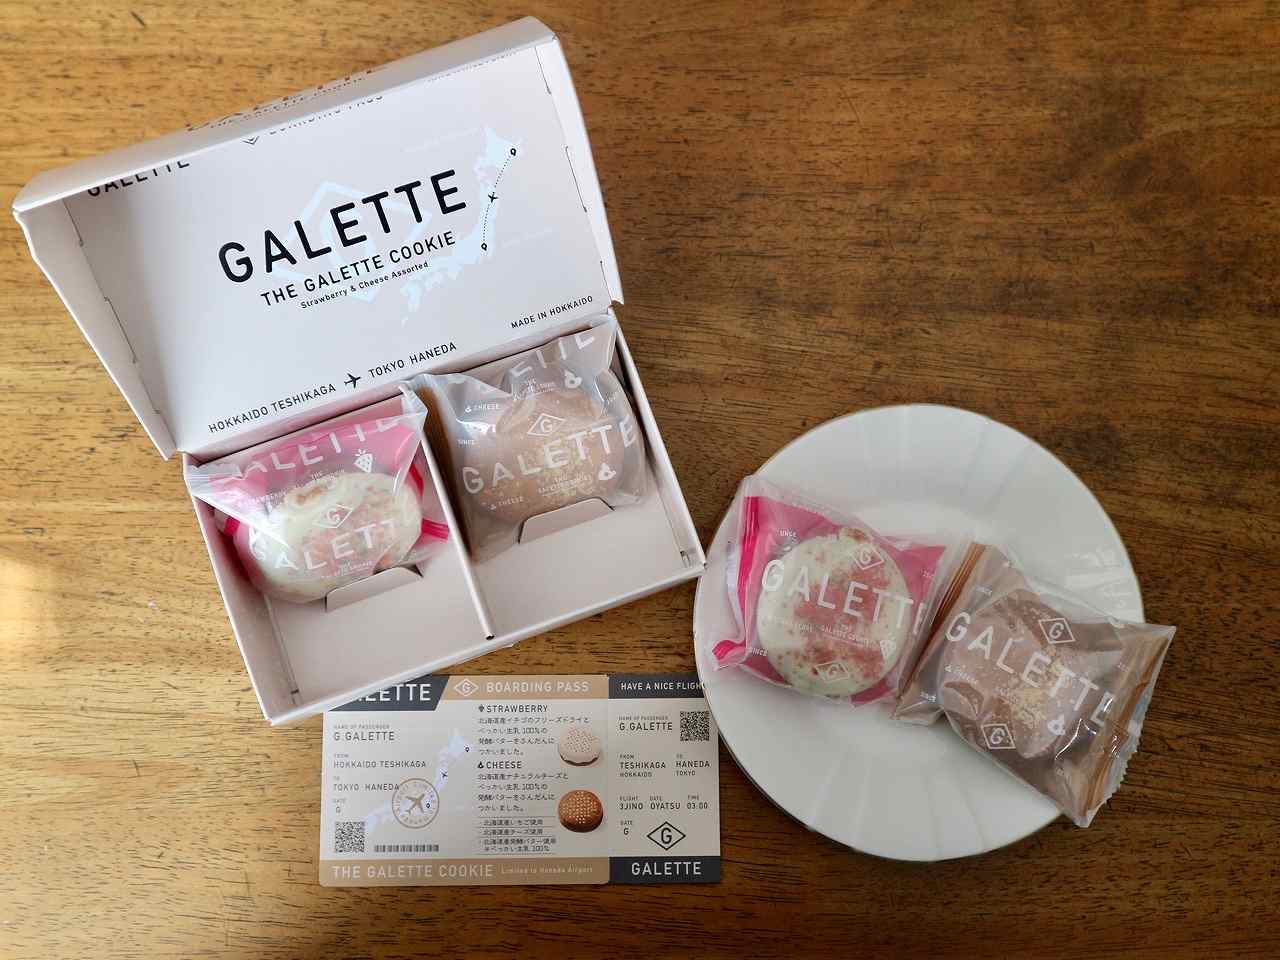 THE GALETTE COOKIEをお土産に